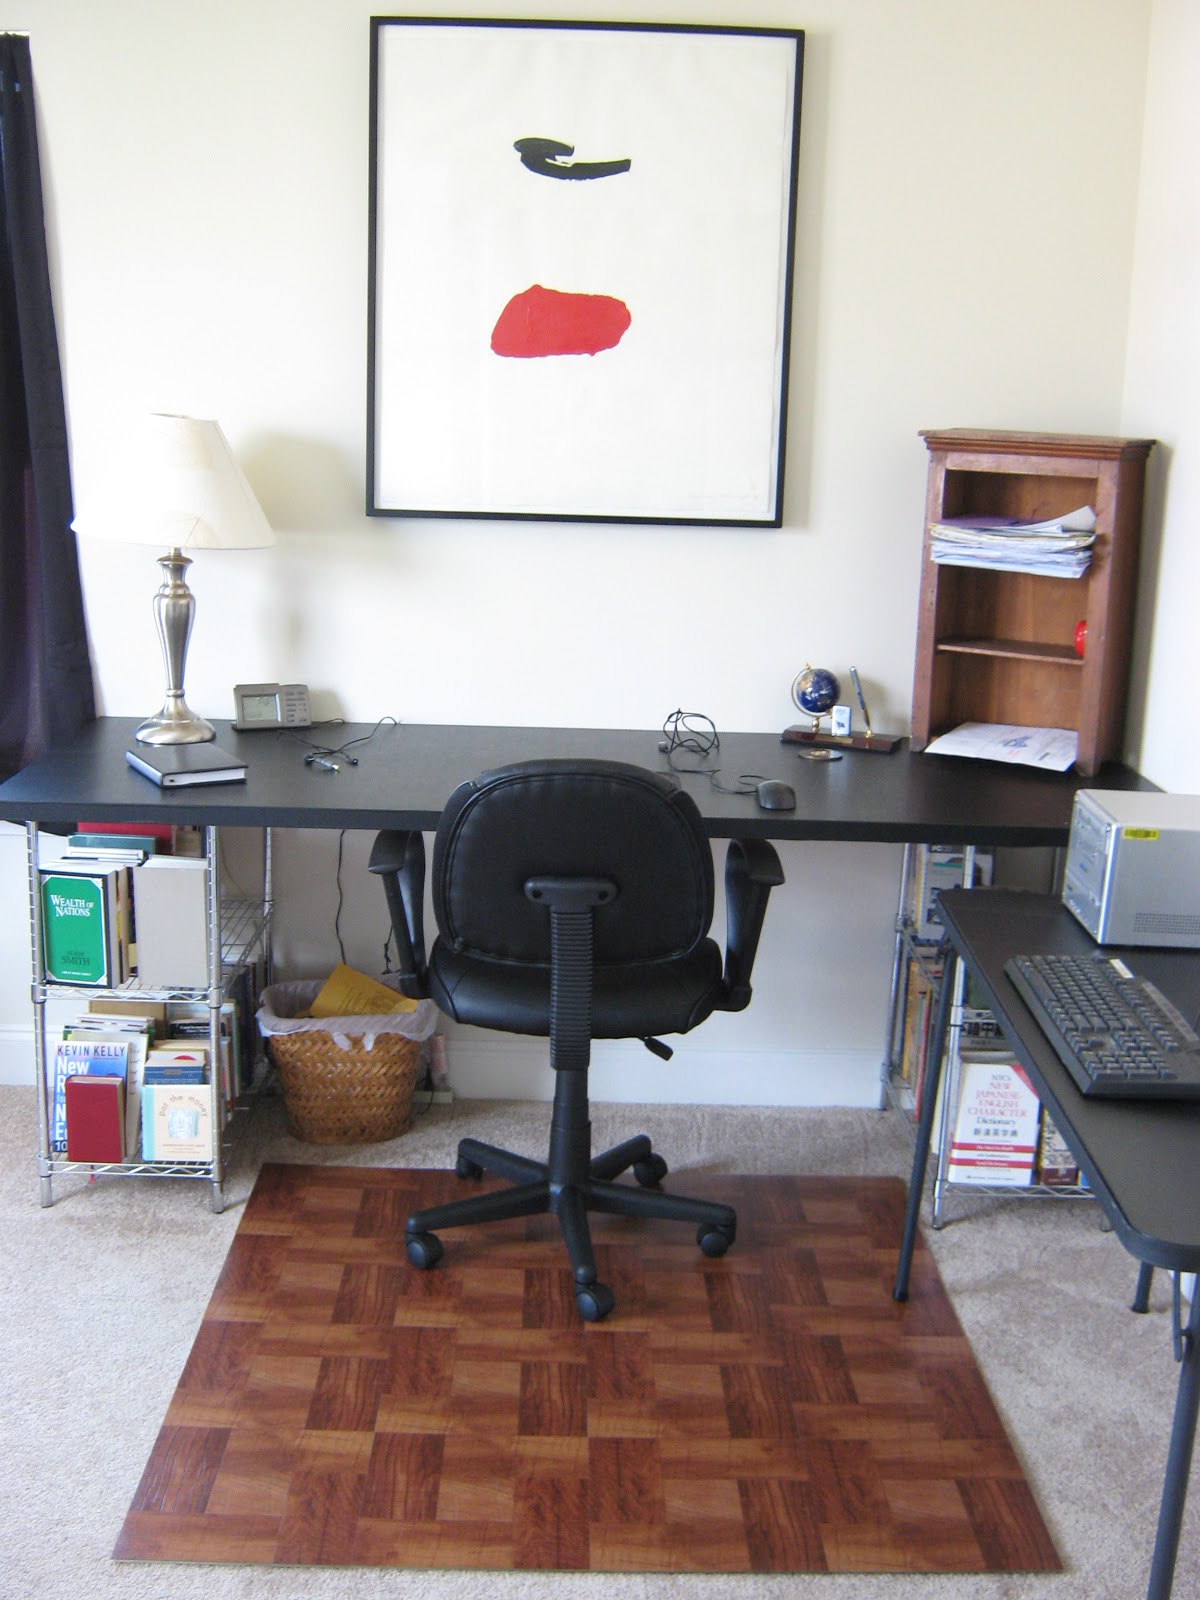 Fake-It Frugal: DIY "Wooden" Office Chair Mat